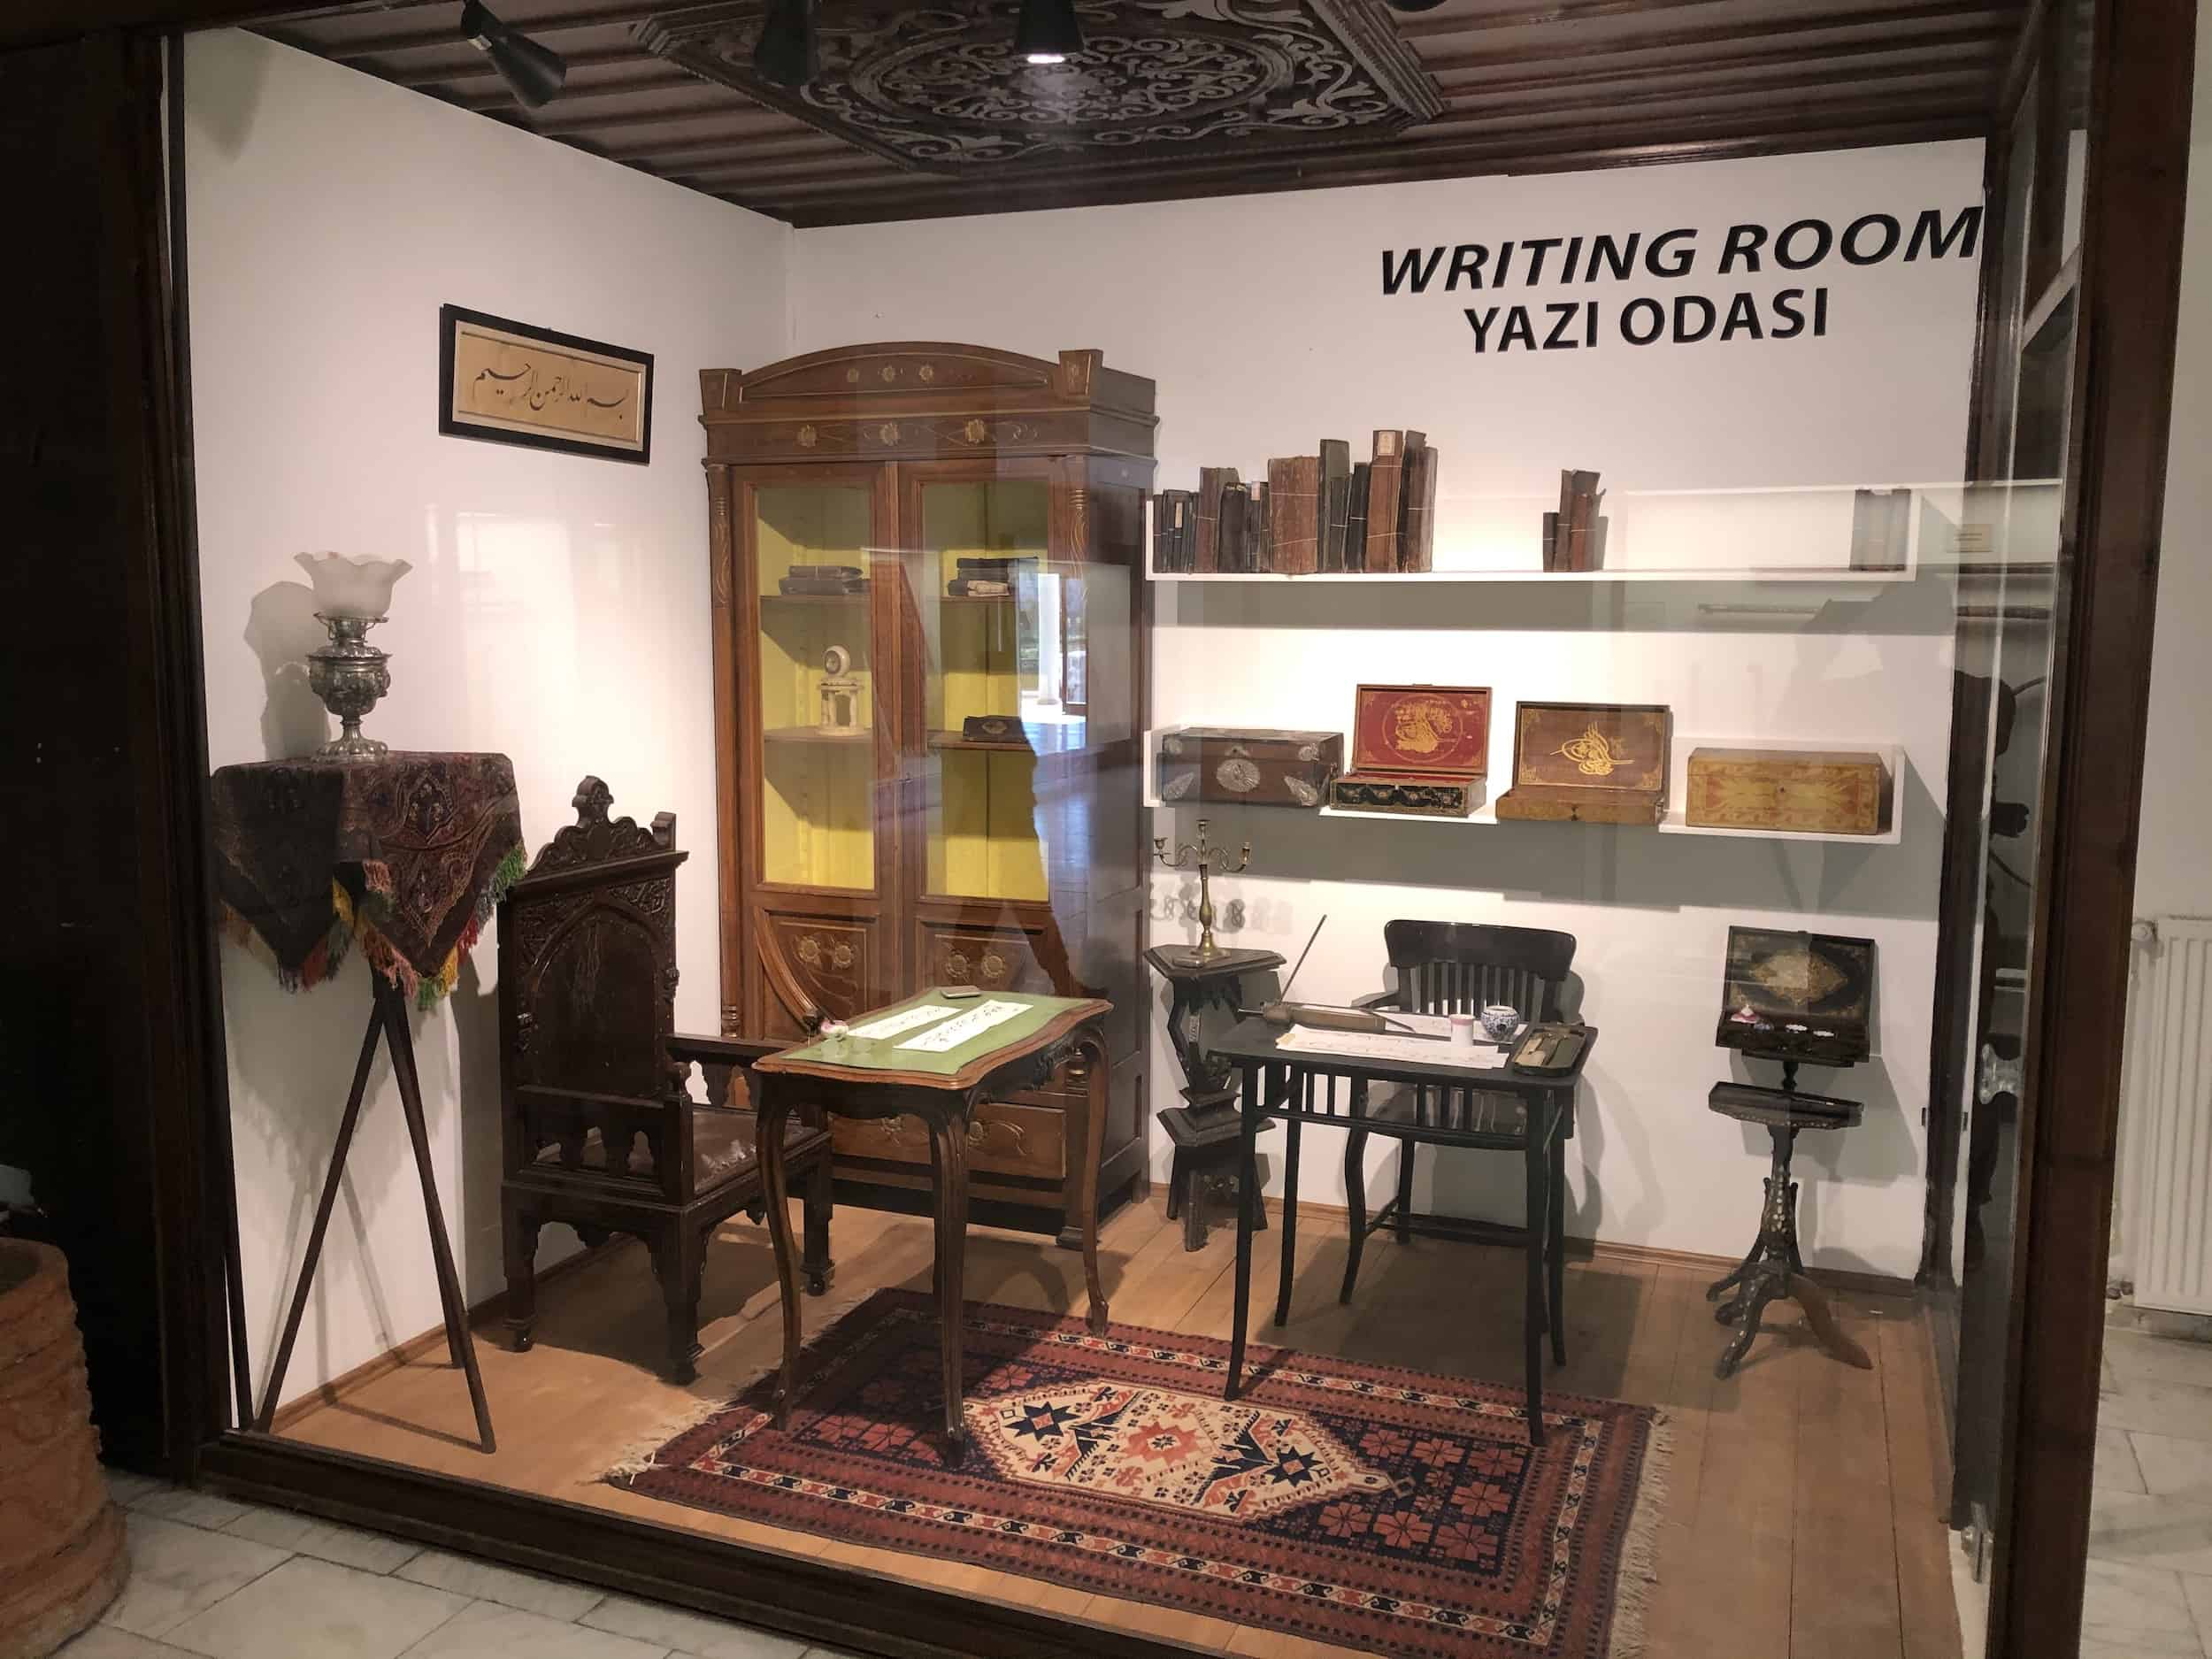 Writing room at the Edirne Archaeology and Ethnography Museum in Edirne, Turkey